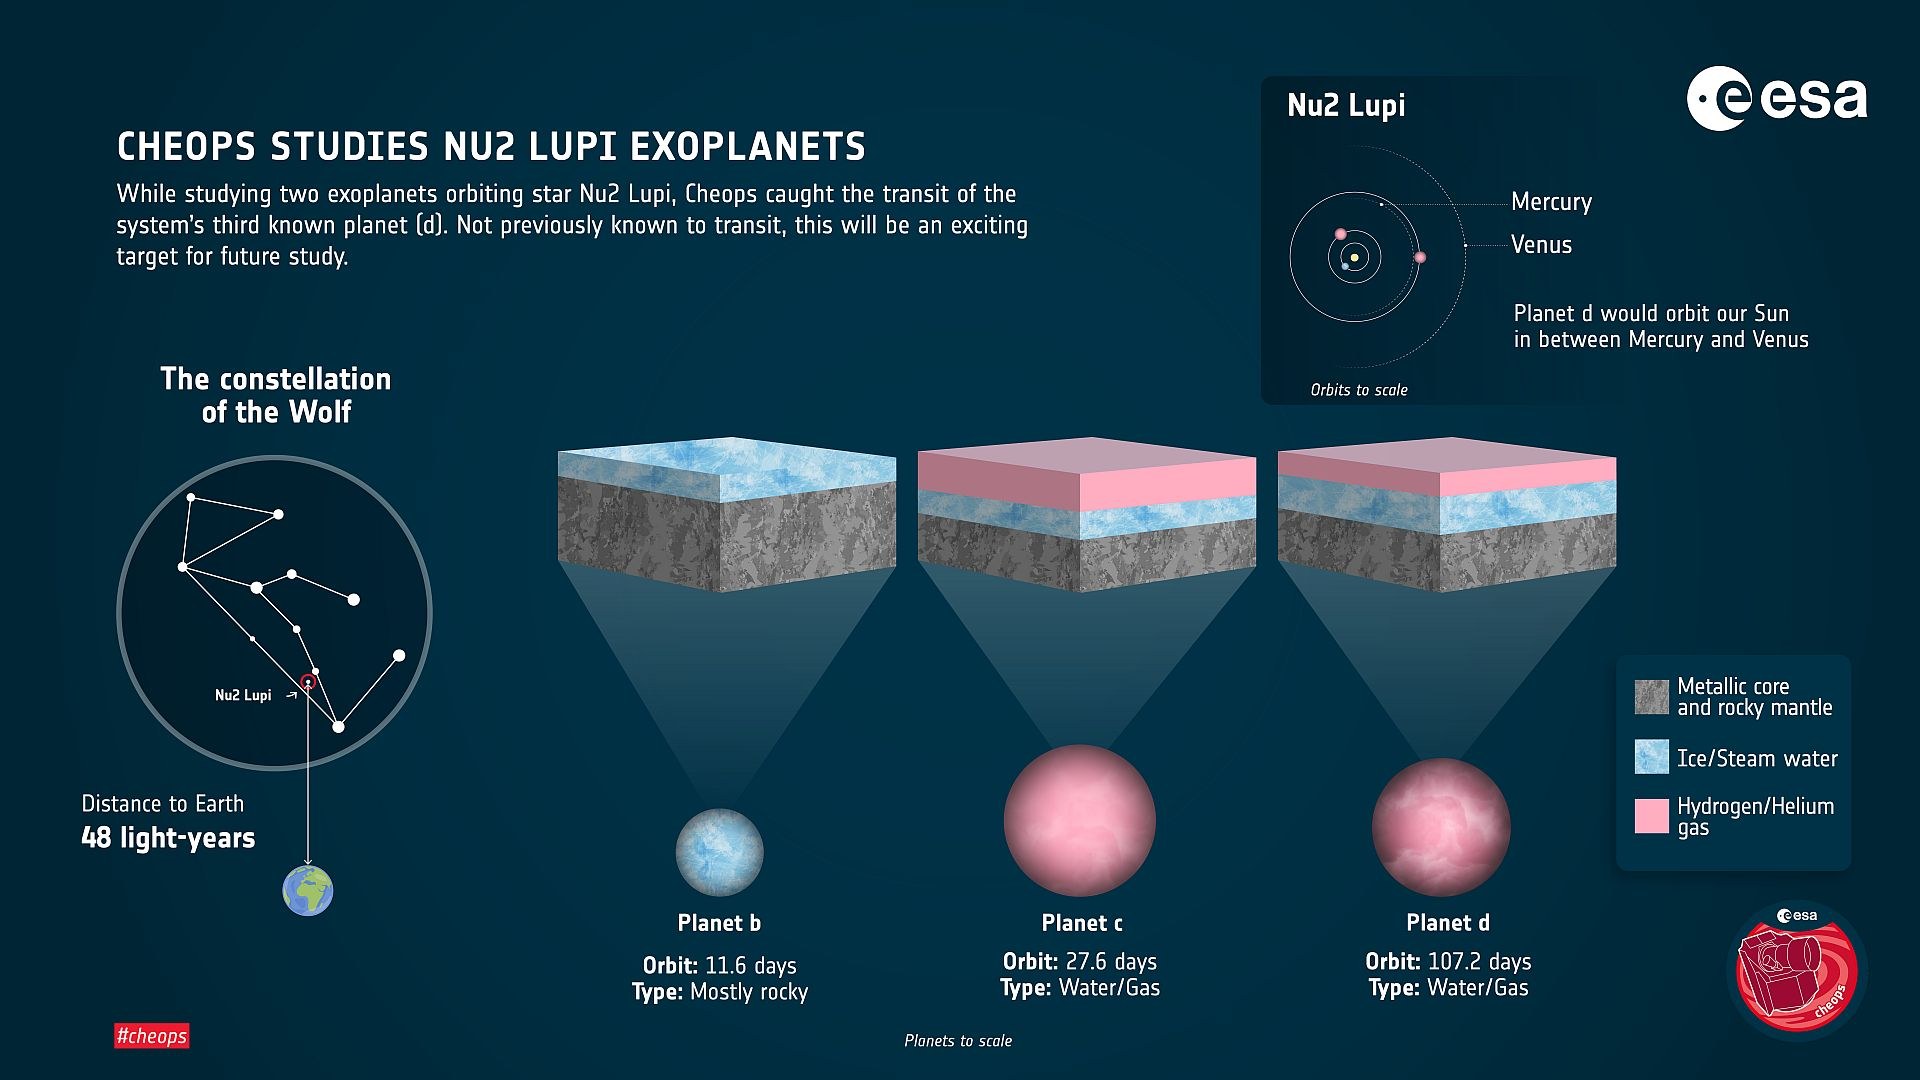 Comparison of the sizes, orbits, orbital periods and compositions of the three exoplanets orbiting the star Nu2 Lupi in the constellation Lupi (Wolf)